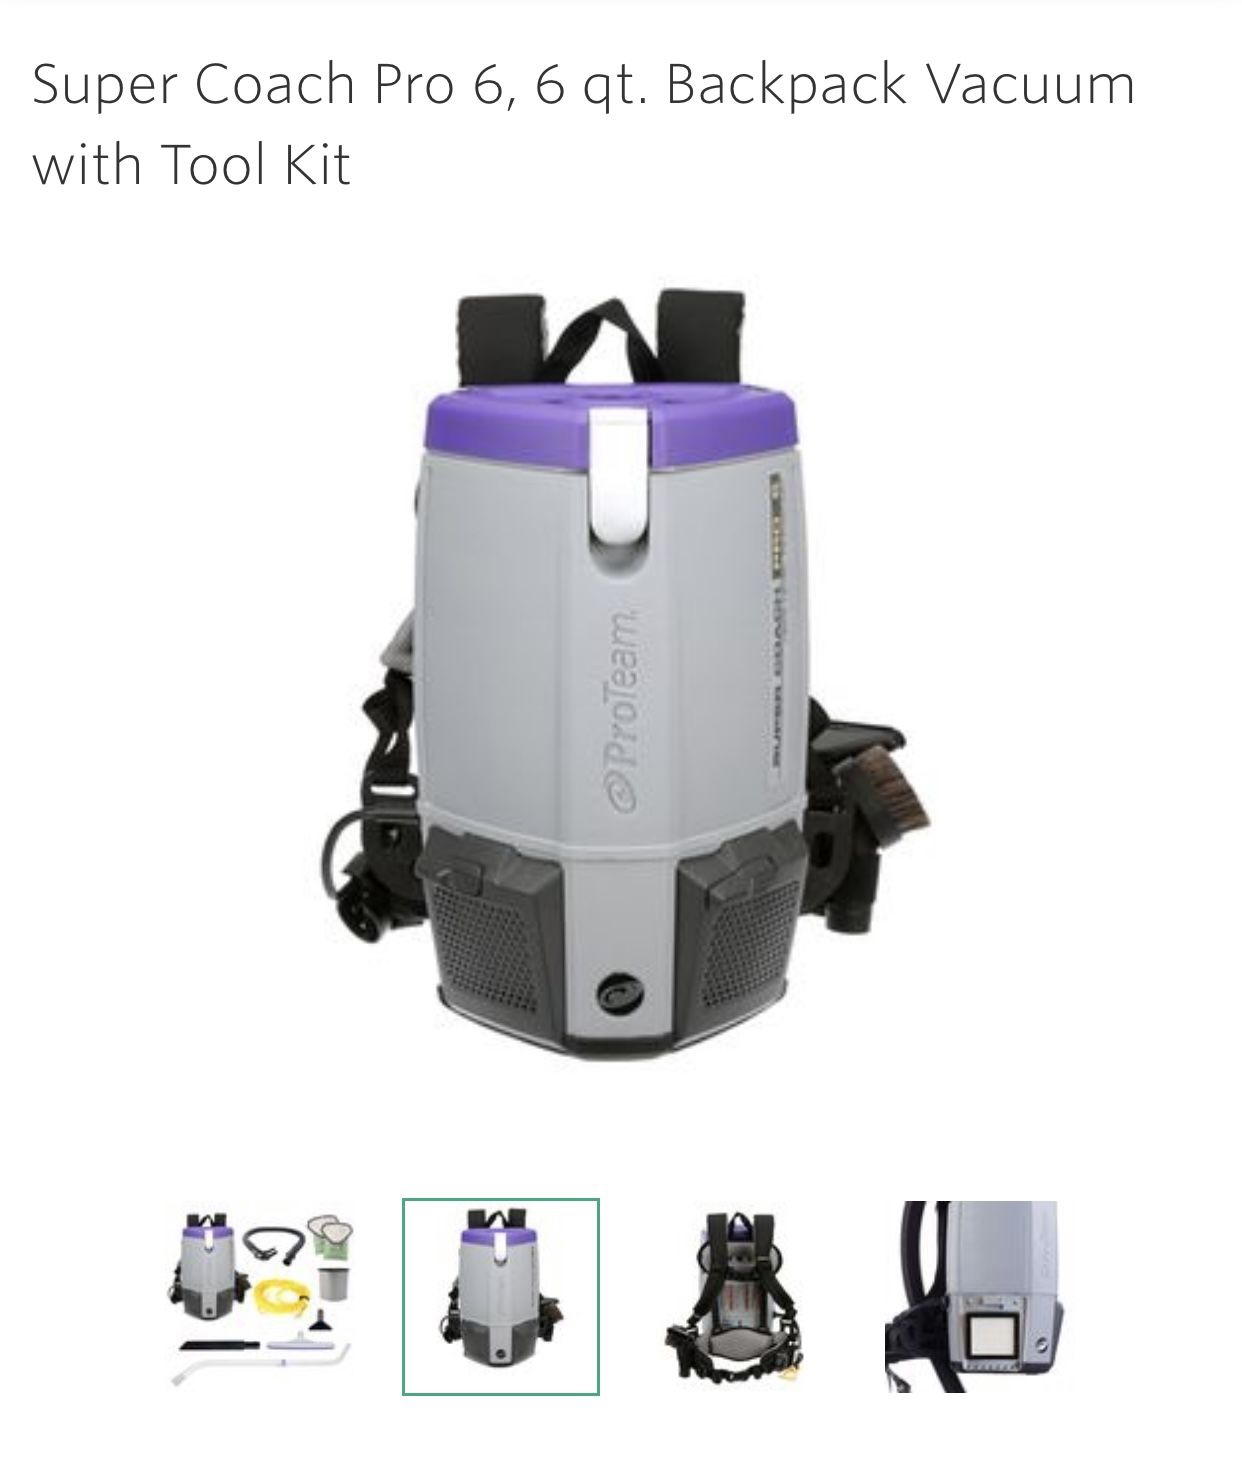 Pro Team - Super Coach Pro 6, 6 qt. Backpack Vacuum with Tool Kit